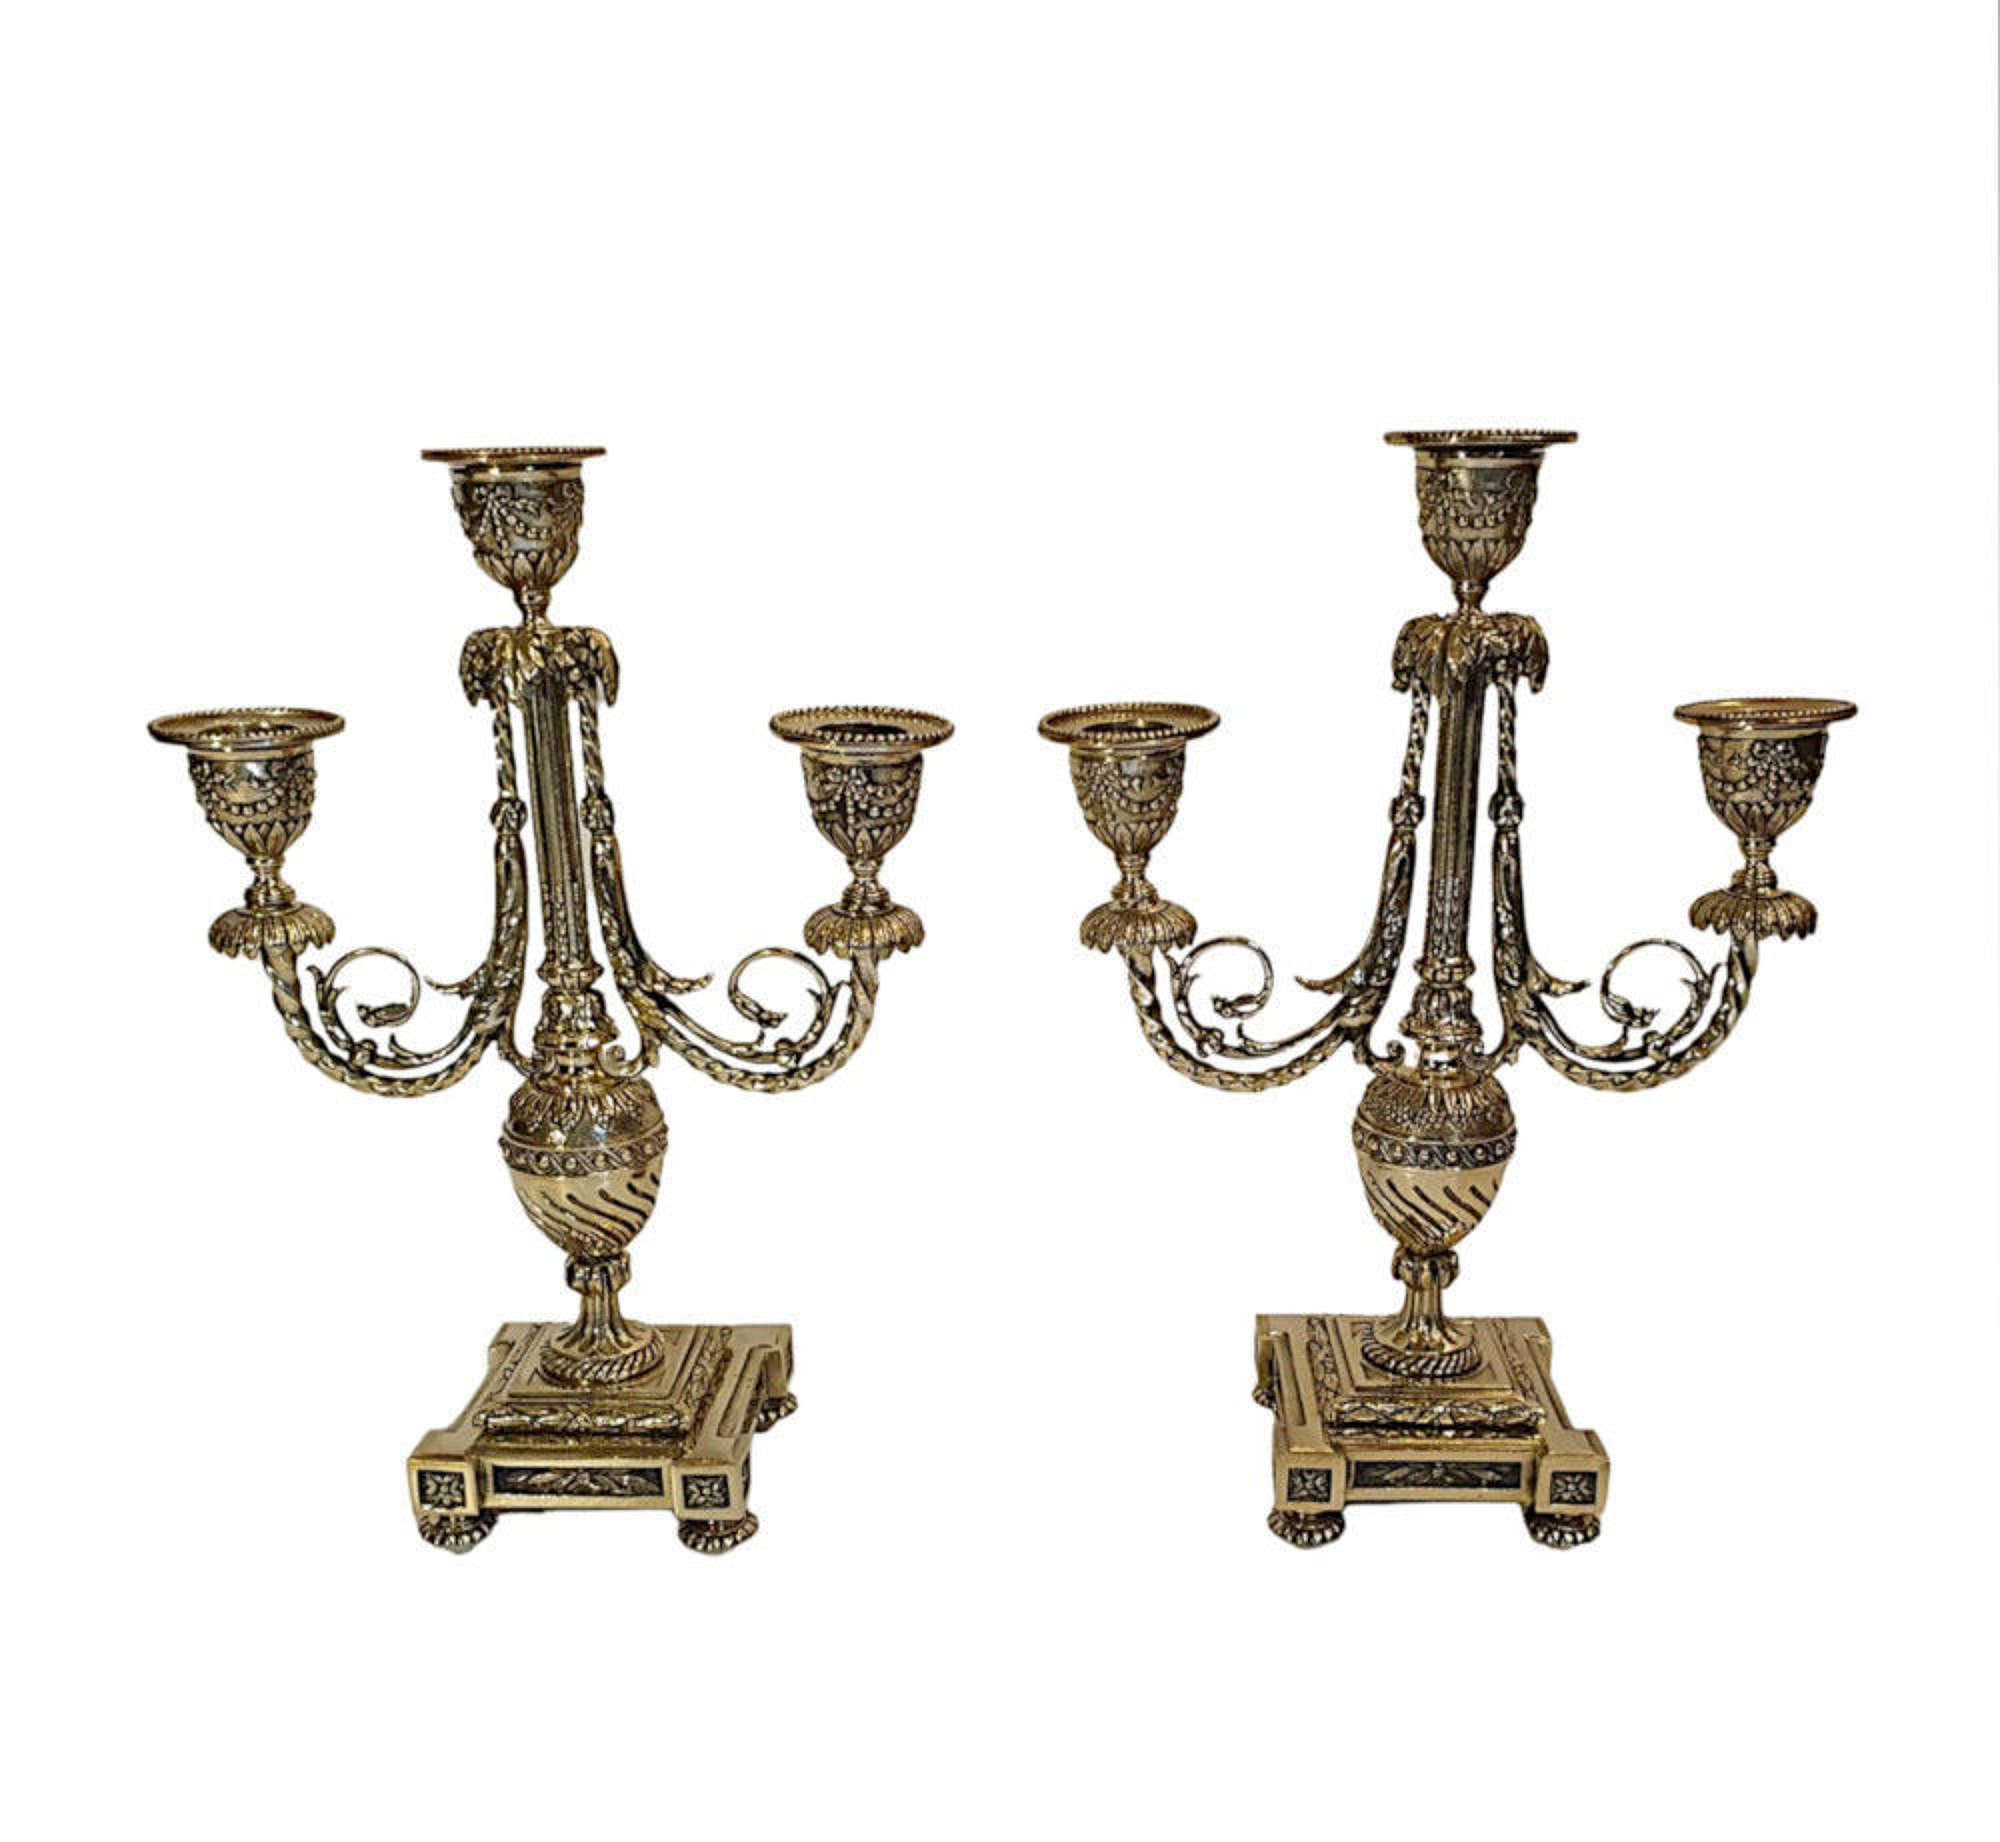 A Gorgeous Quality Pair Of 19th Century Polished Brass Three Branch Ca